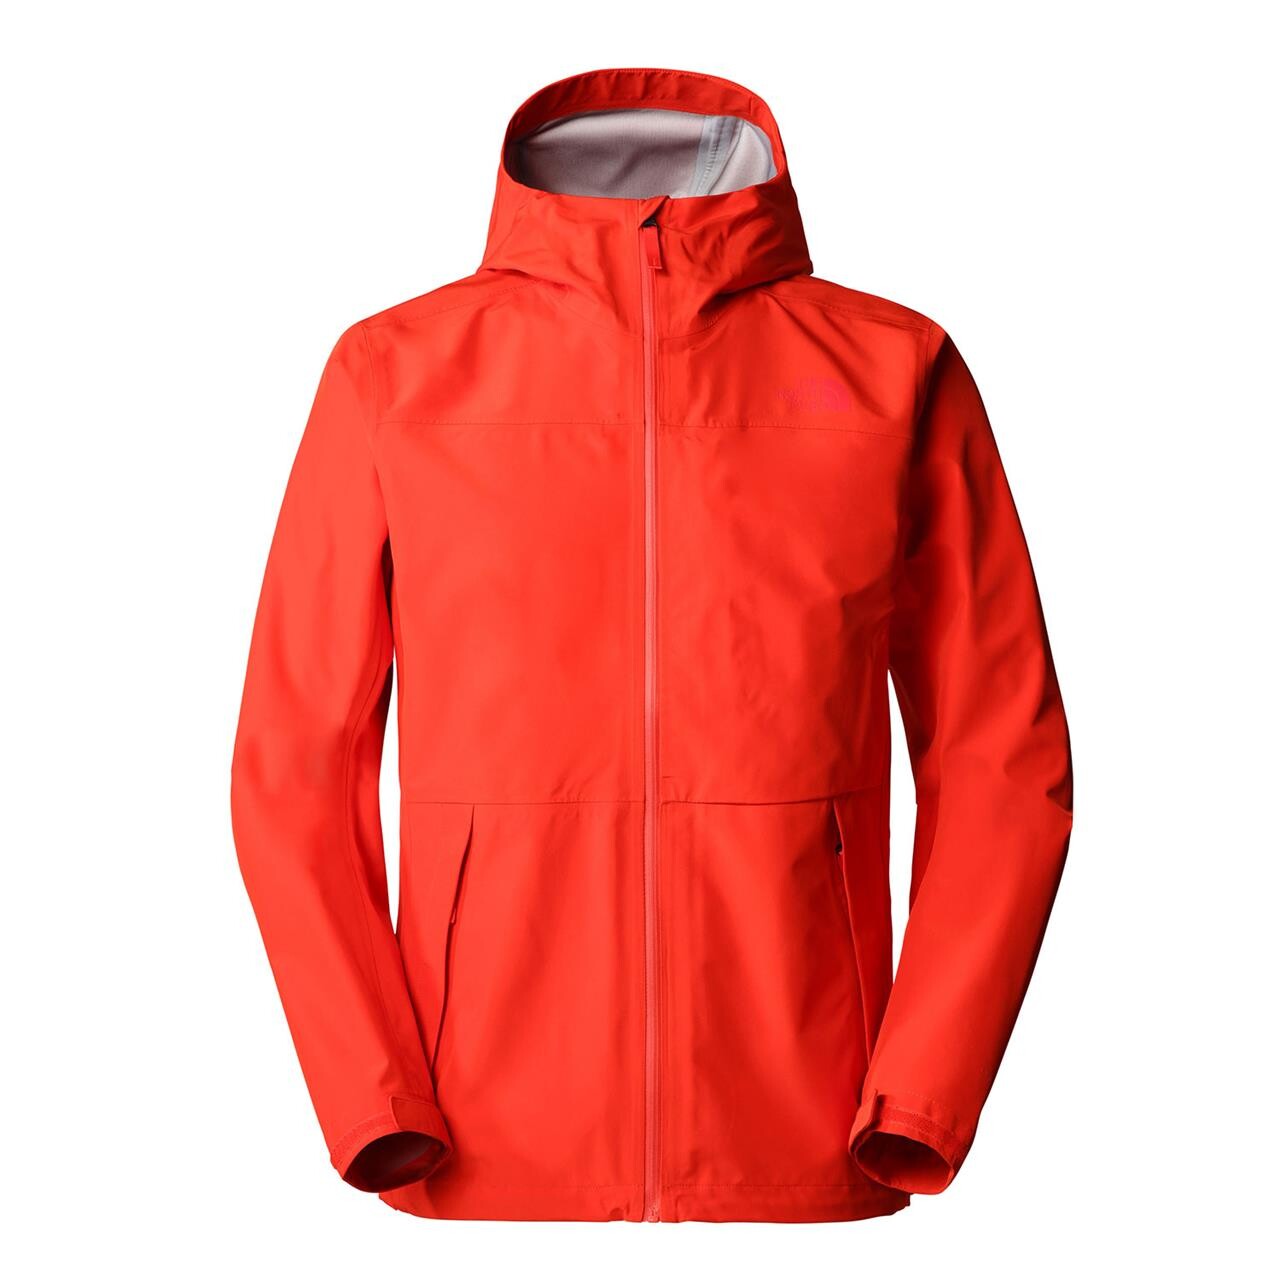 Se The North Face Mens Dryzzle Futurelight Jacket (Rød (FIERY RED) Small) hos Friluftsland.dk